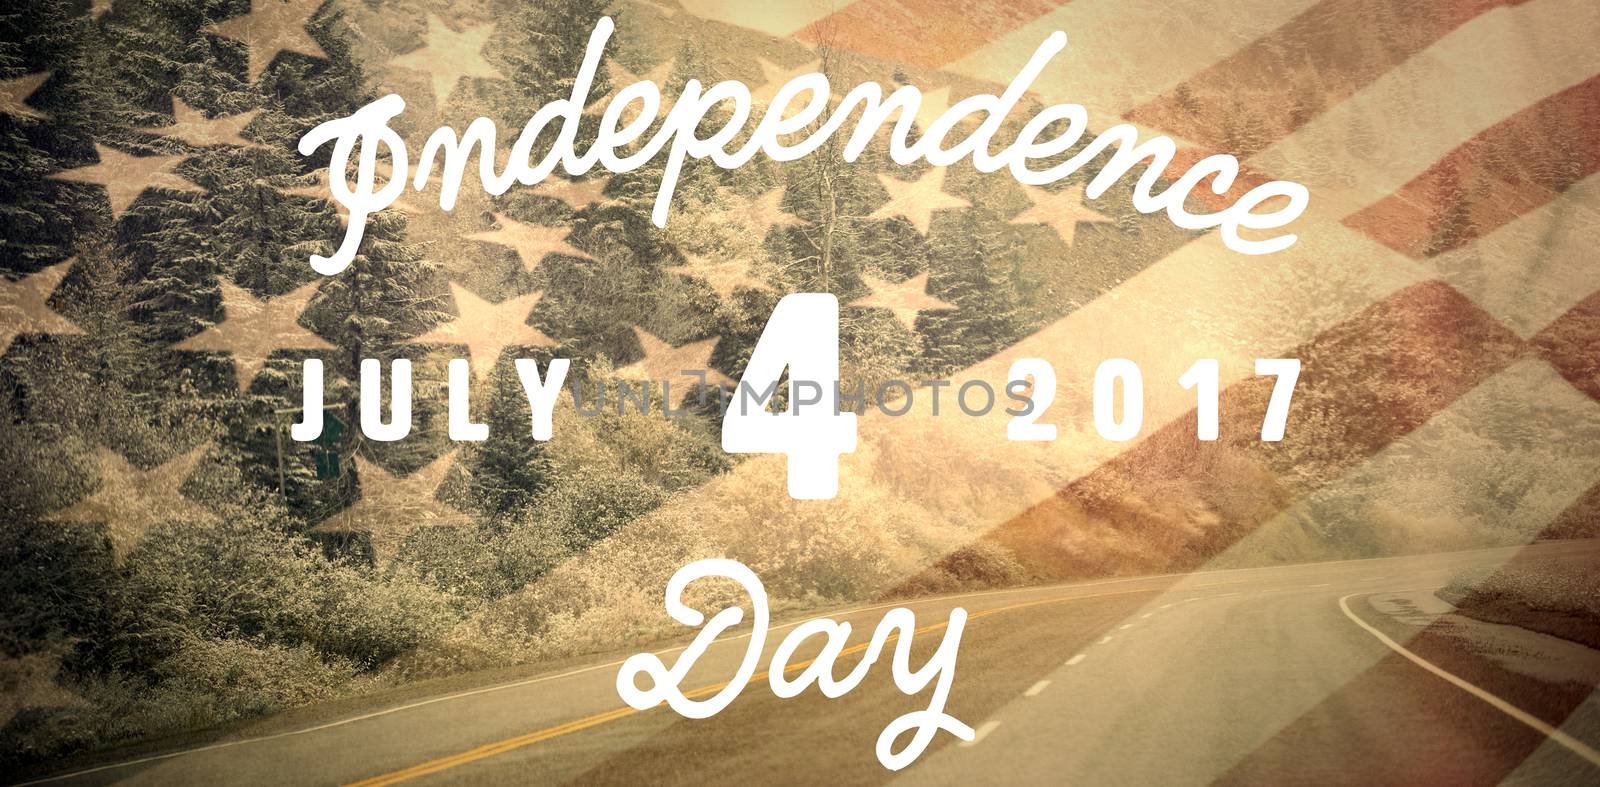 Digitally generated image of happy 4th of july message against asphalt road through forest